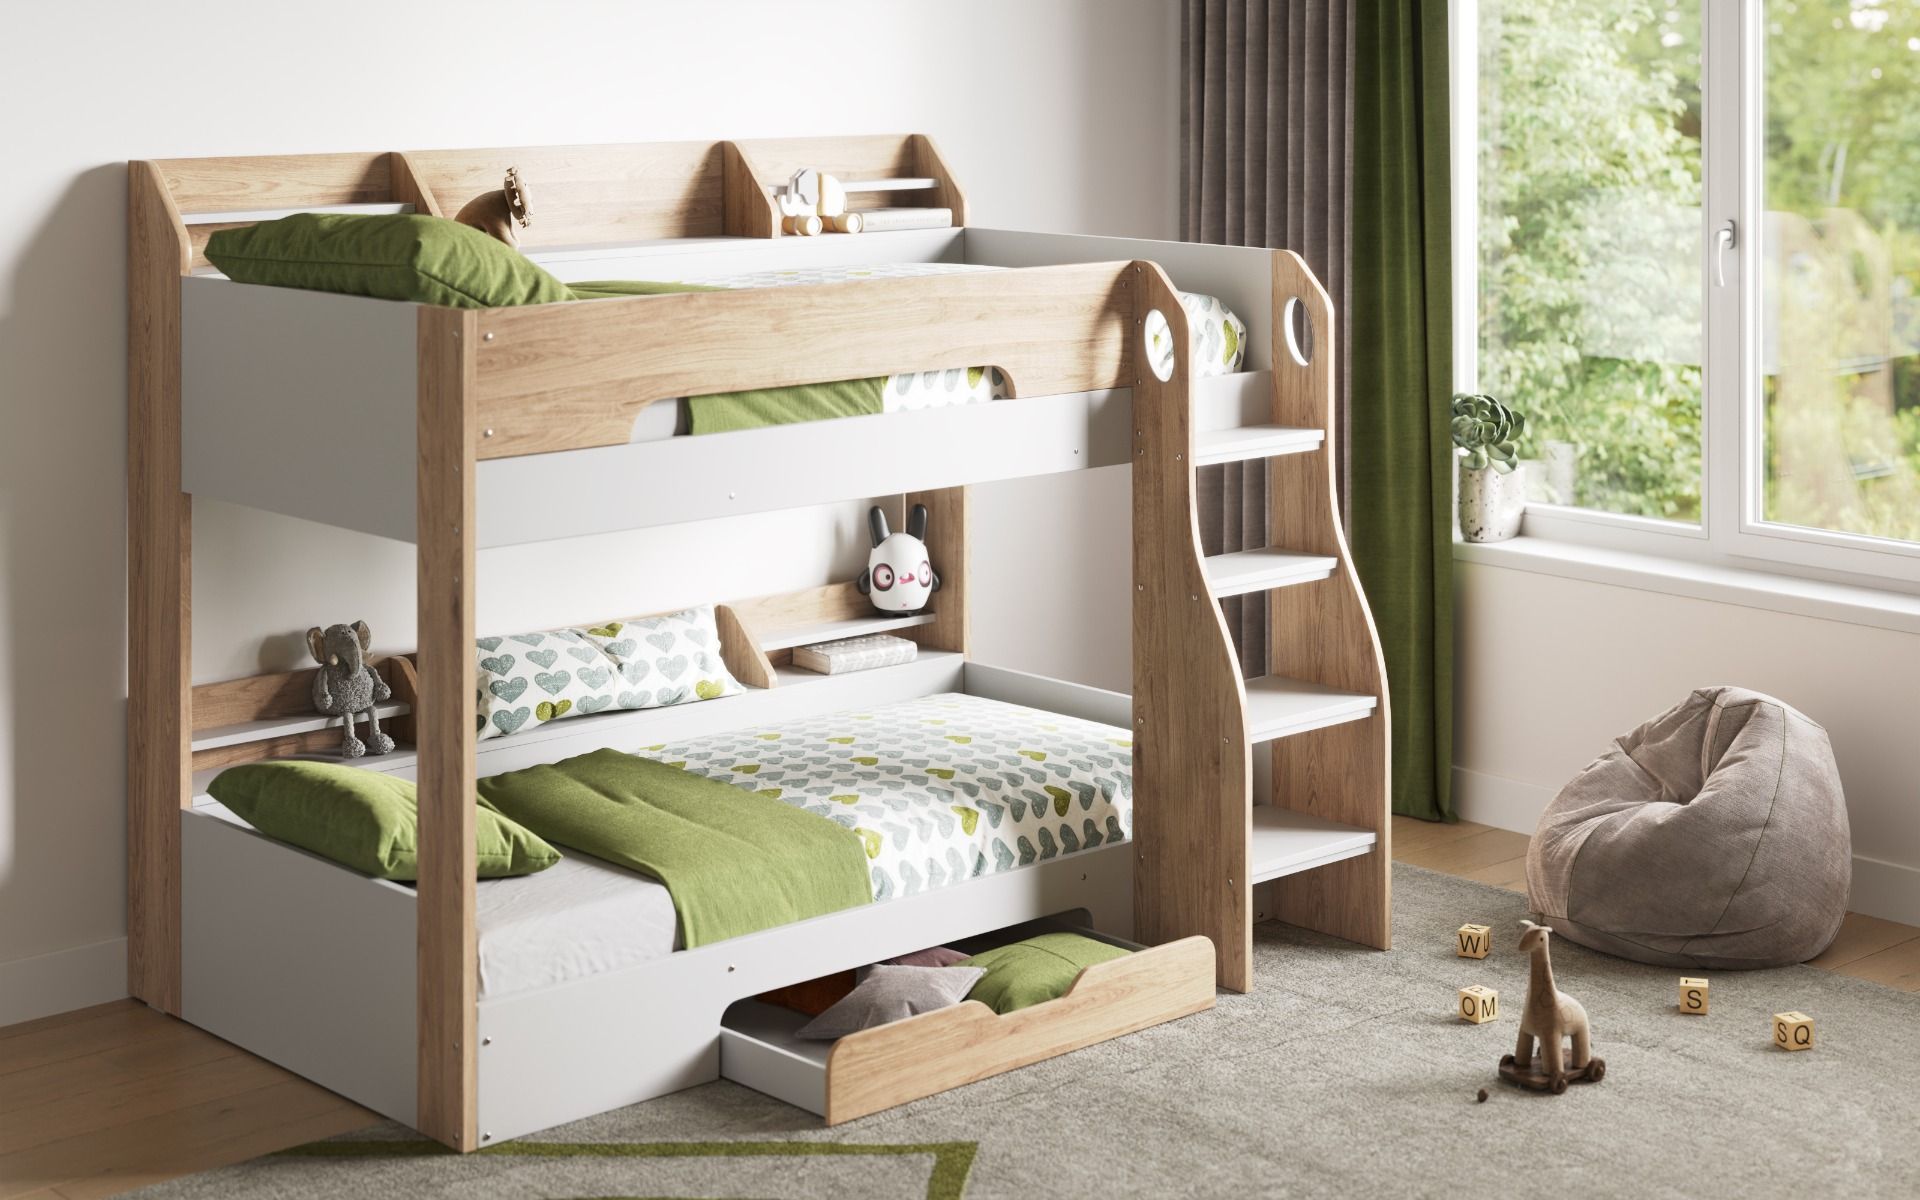 Flair Flick Bunk Bed with Shelves And Drawer - Oak